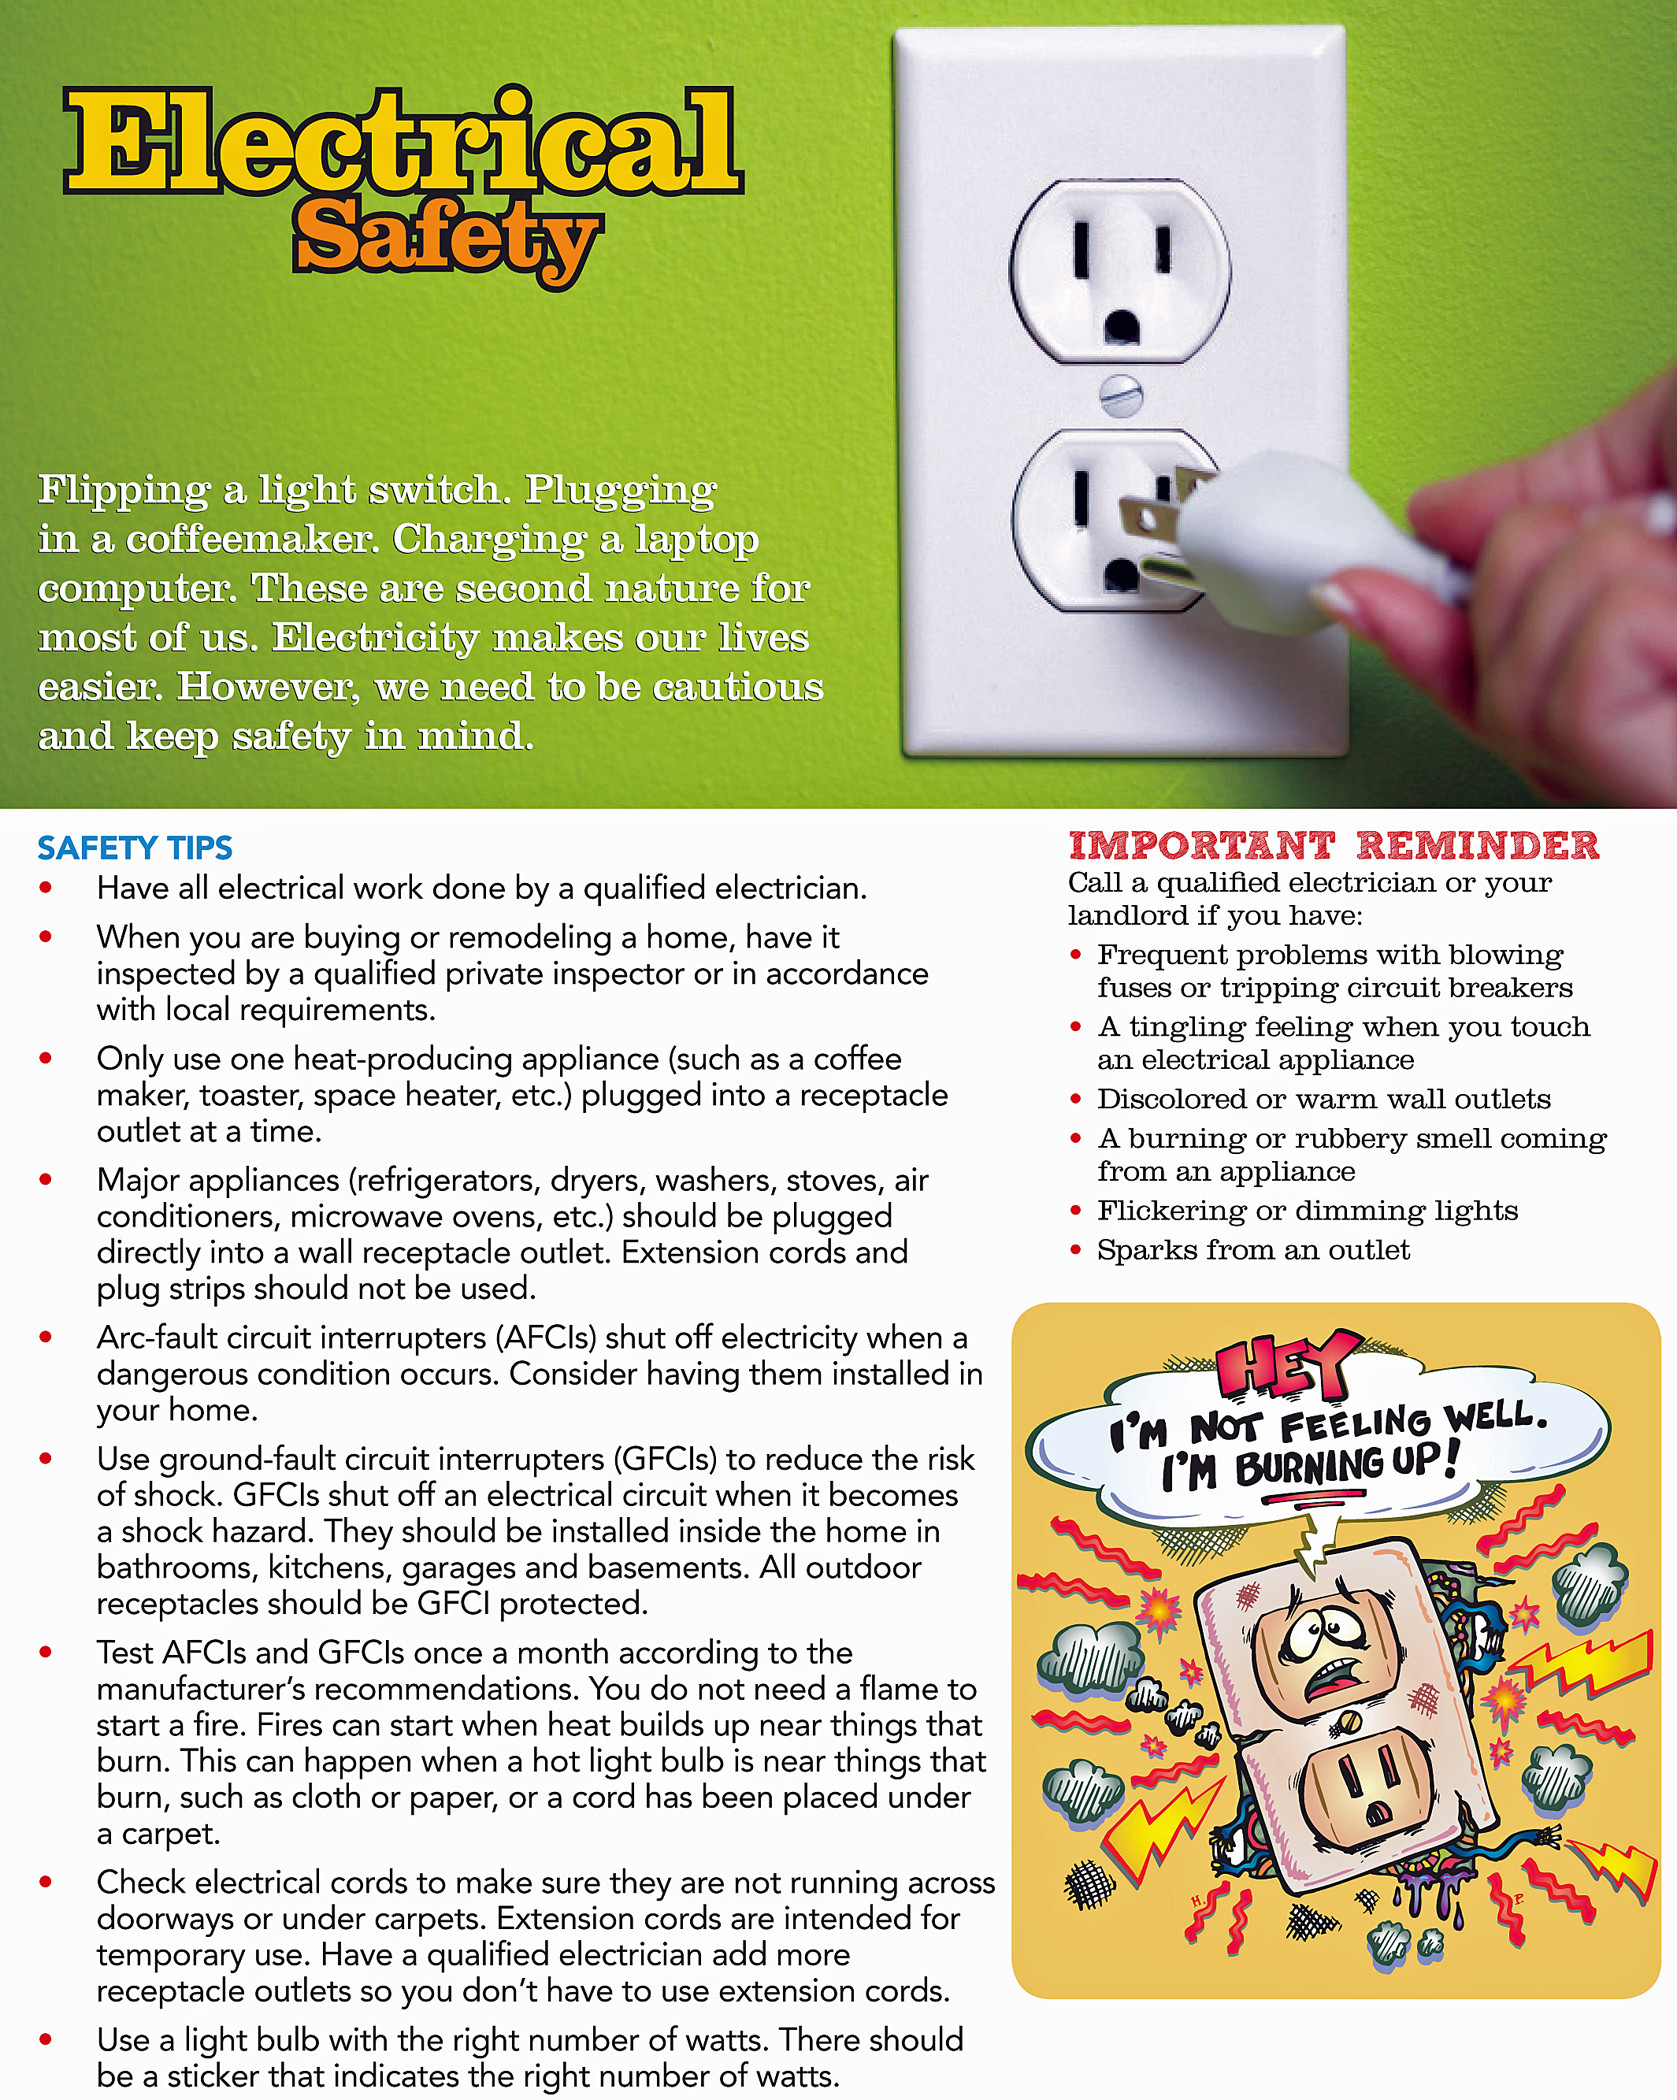 Excellent quality Residential Extension Cord Safety Tips, cord safety